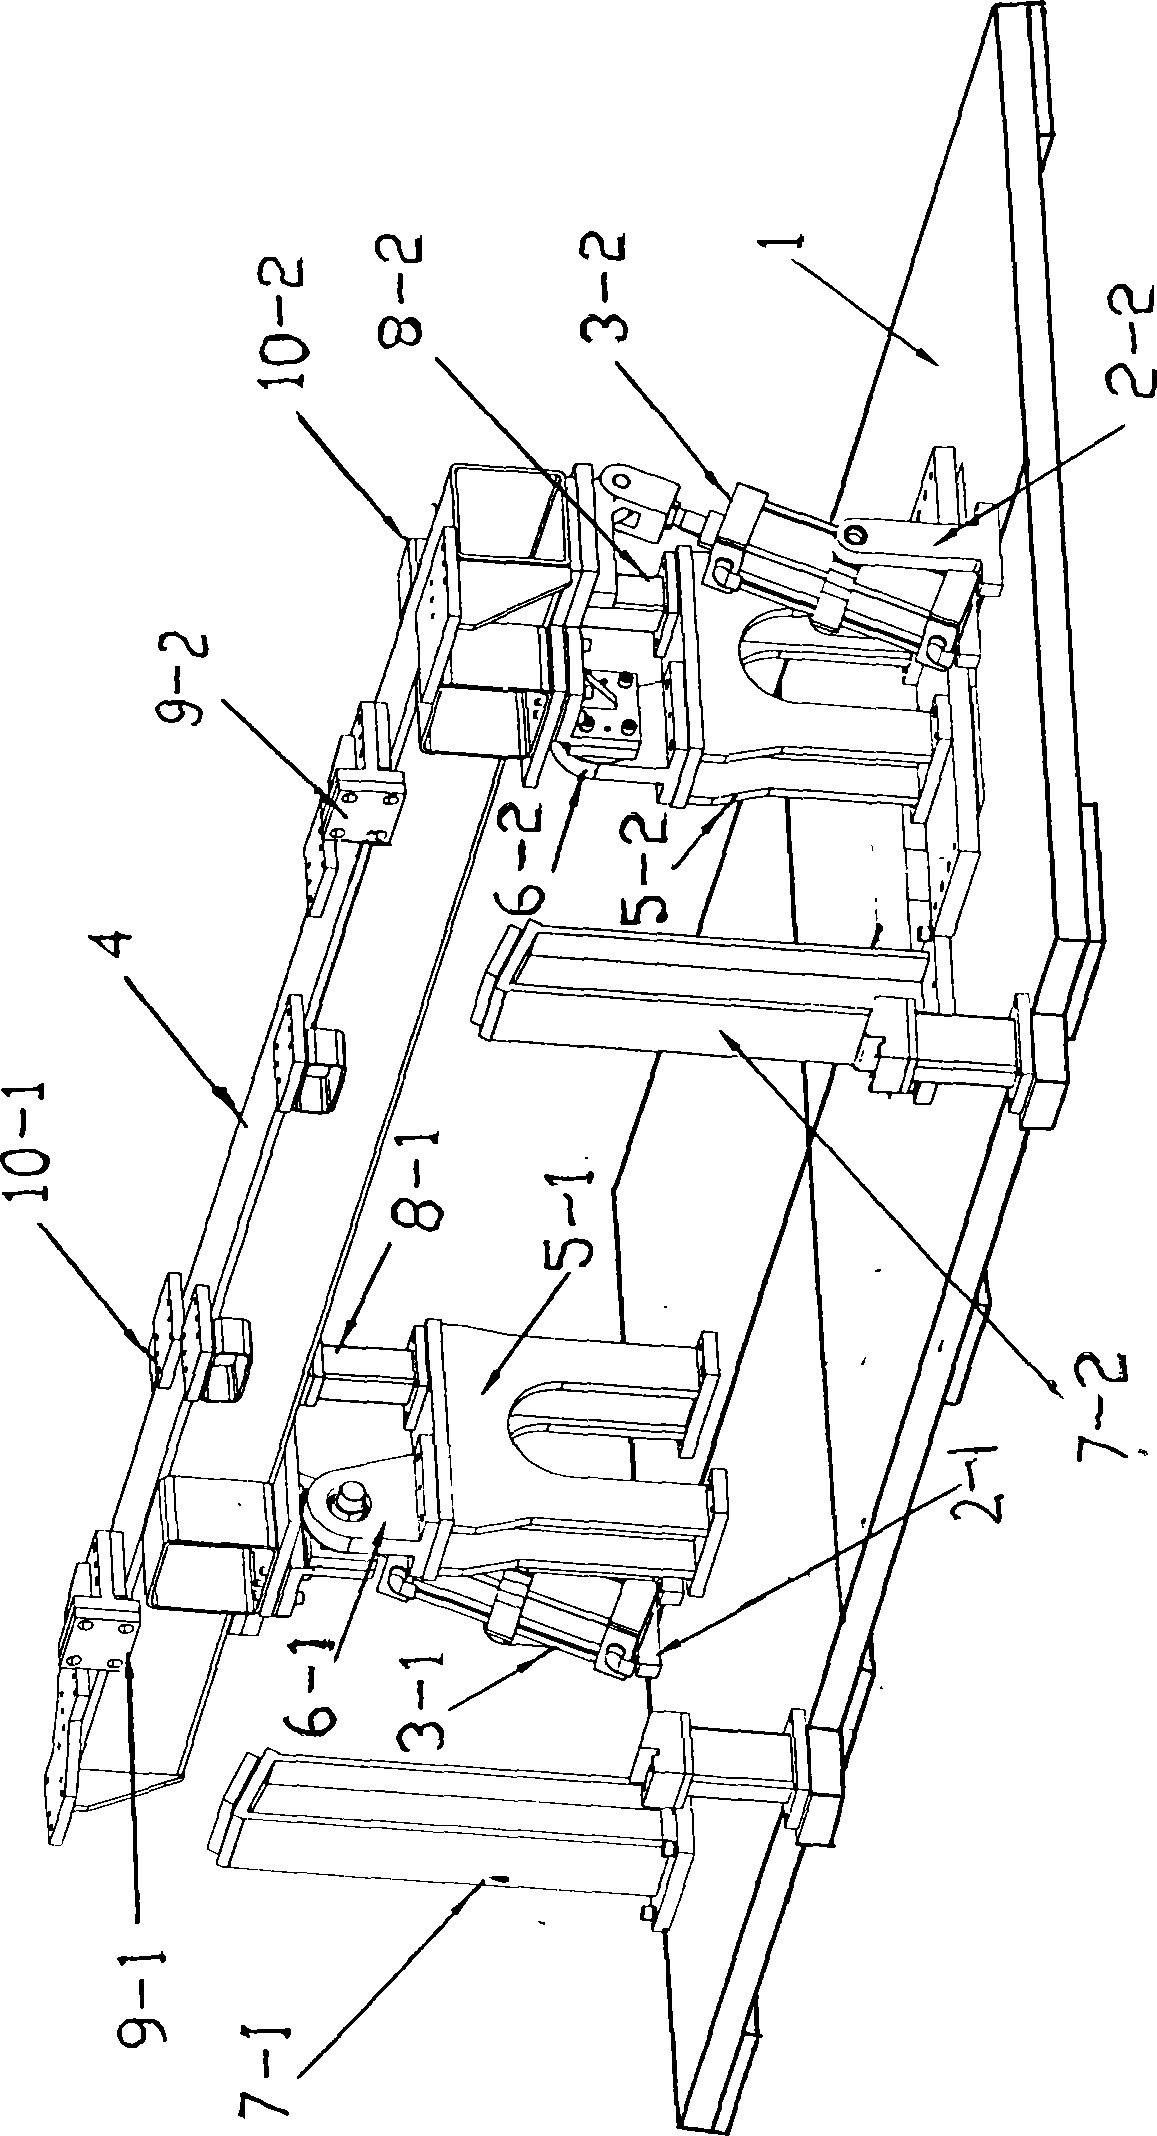 Turnover mechanism for installing vehicle side around external covering